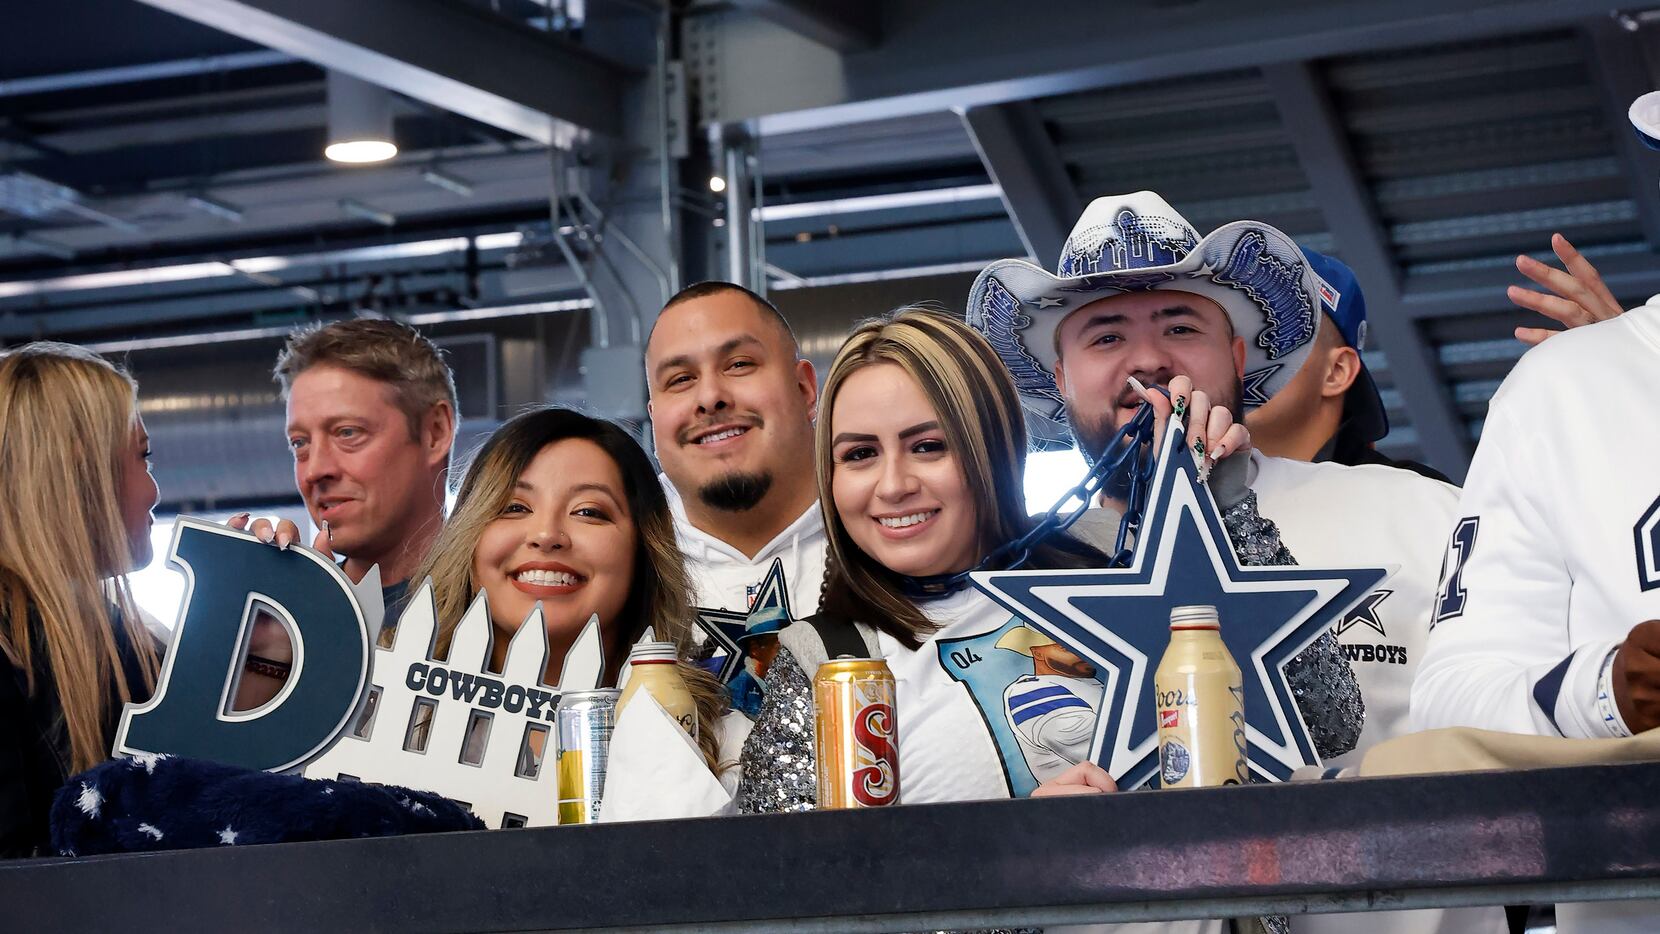 Photos: Playoff ready! Cowboys, fans prepare for wild card matchup vs.  49ers at AT&T Stadium